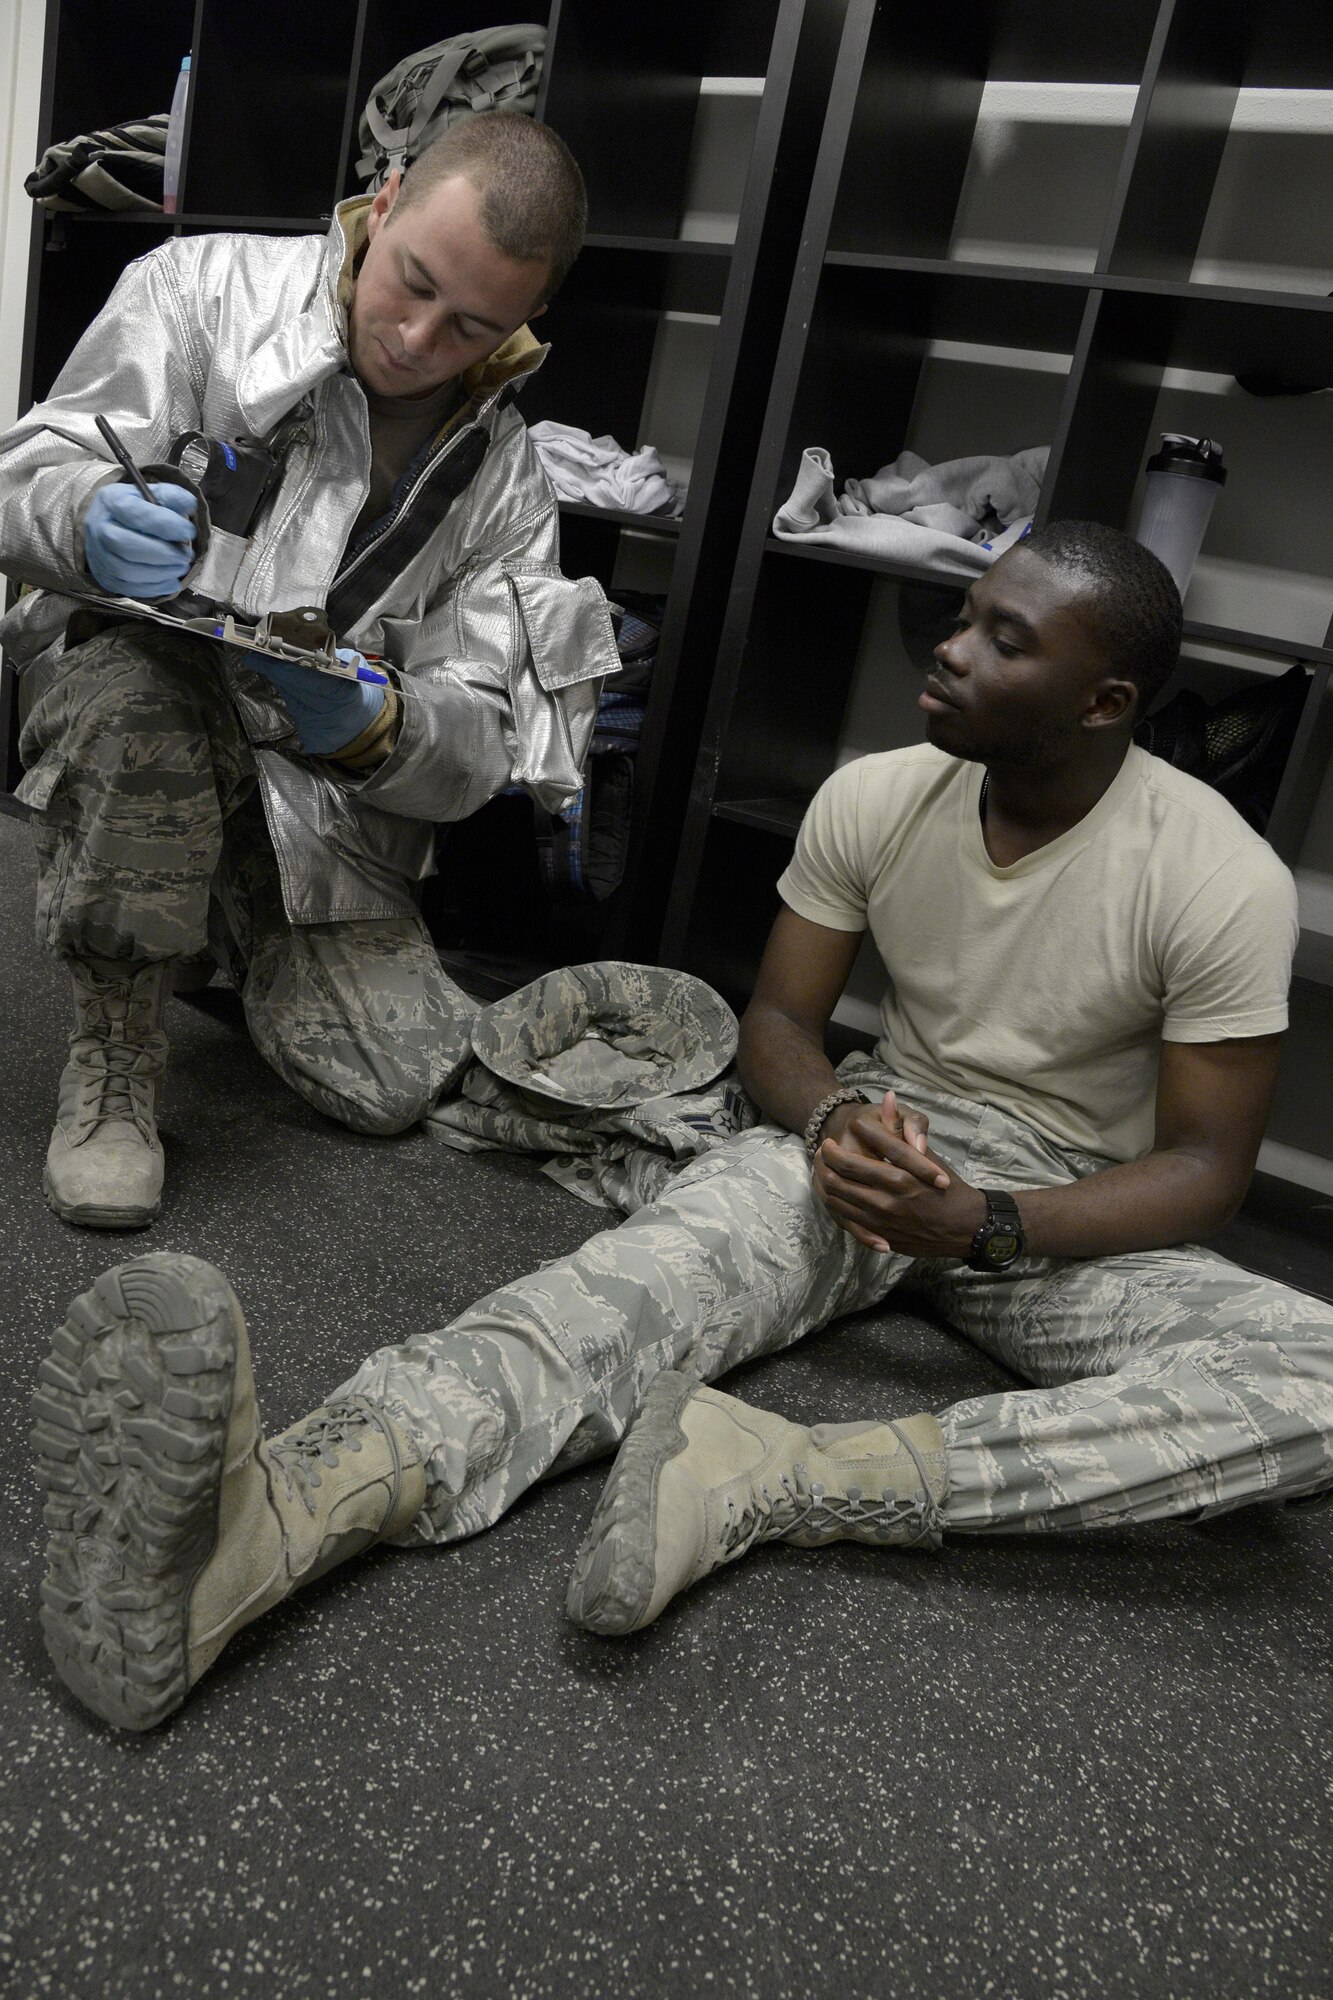 Senior Airman Austin, fire truck driver and operator, evaluates a simulated medical patient with a sprained ankle during a training exercise at an undisclosed location in Southwest Asia Jan. 15, 2015. The exercise tested the Air Expeditionary Wing’s Disease Containment Plan. Austin is currently deployed from Travis Air Force Base, Calif. and is a native of Twinfalls, Idaho.  (U.S. Air Force photo/Tech. Sgt. Marie Brown)